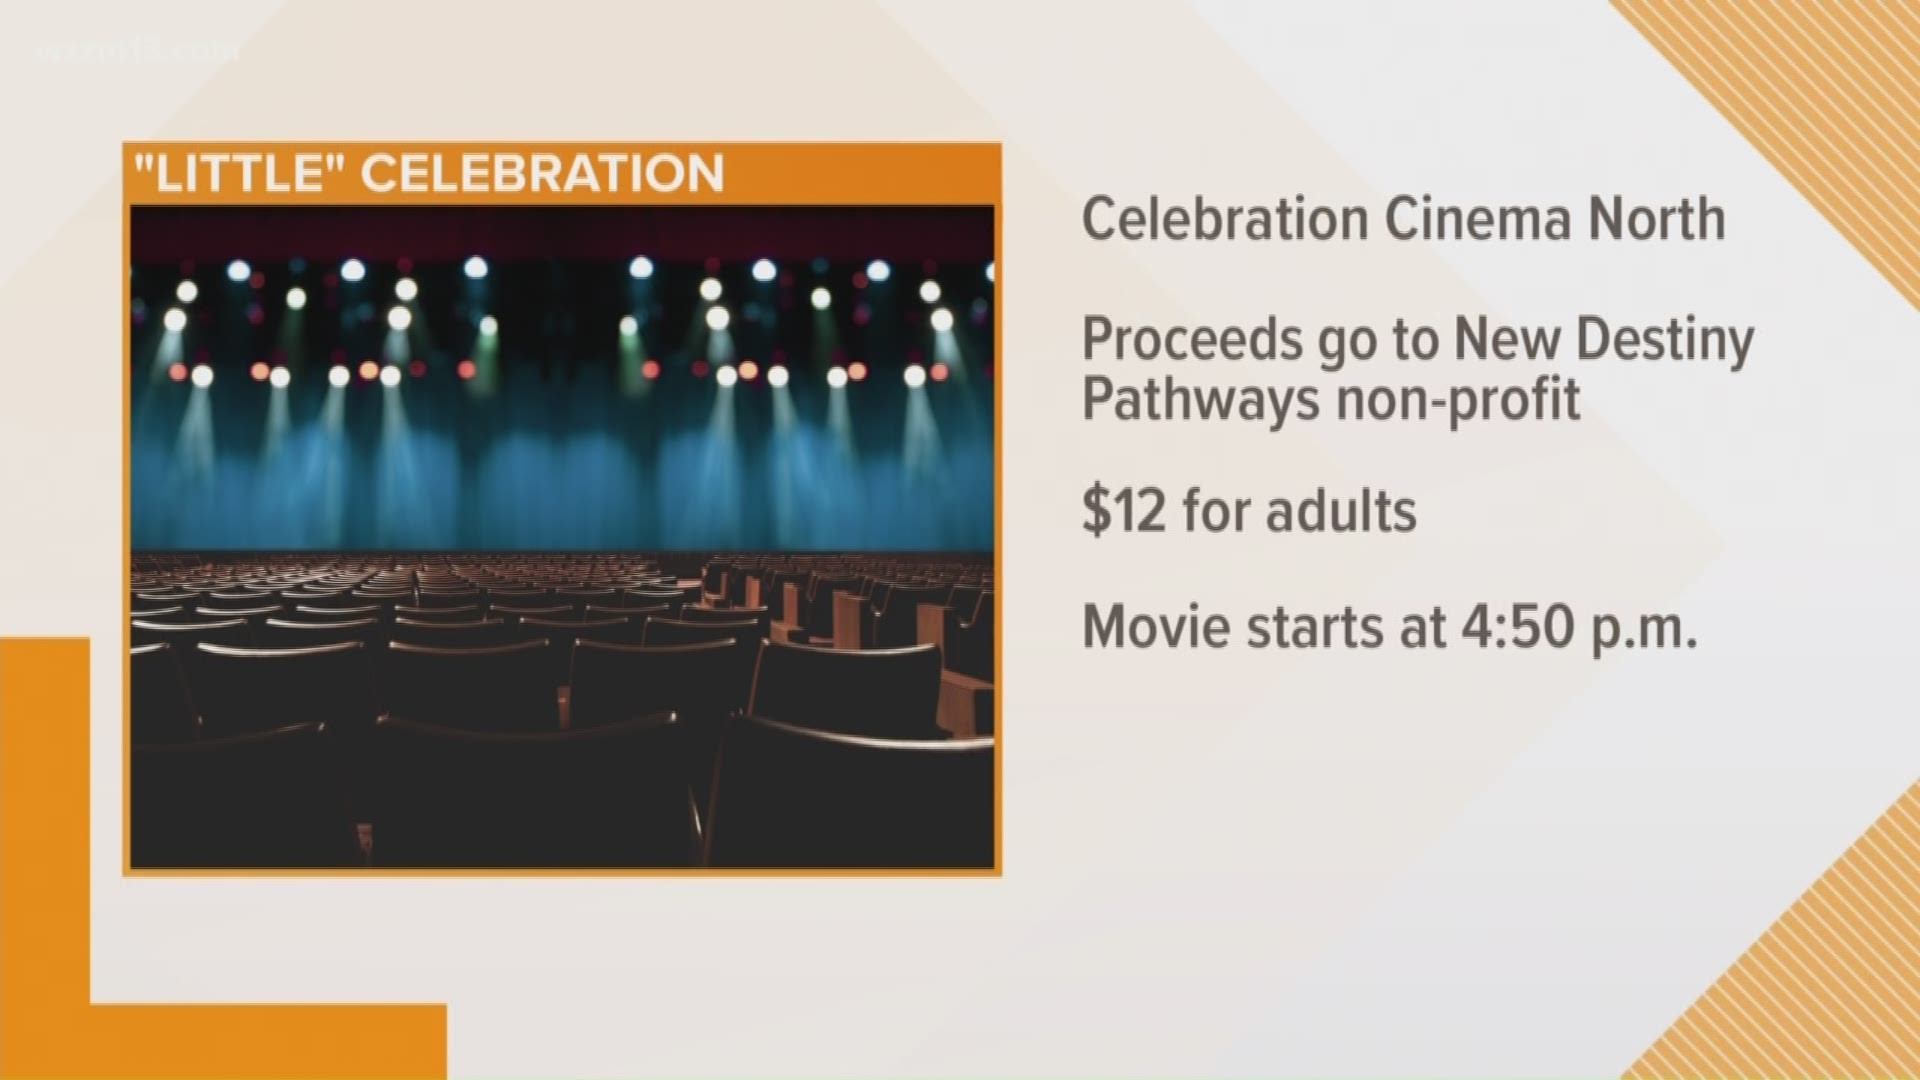 616 Grand Productions is hosting a special film event. You can see the film "Little" while also participating in fun activities and it all supports a good cause.